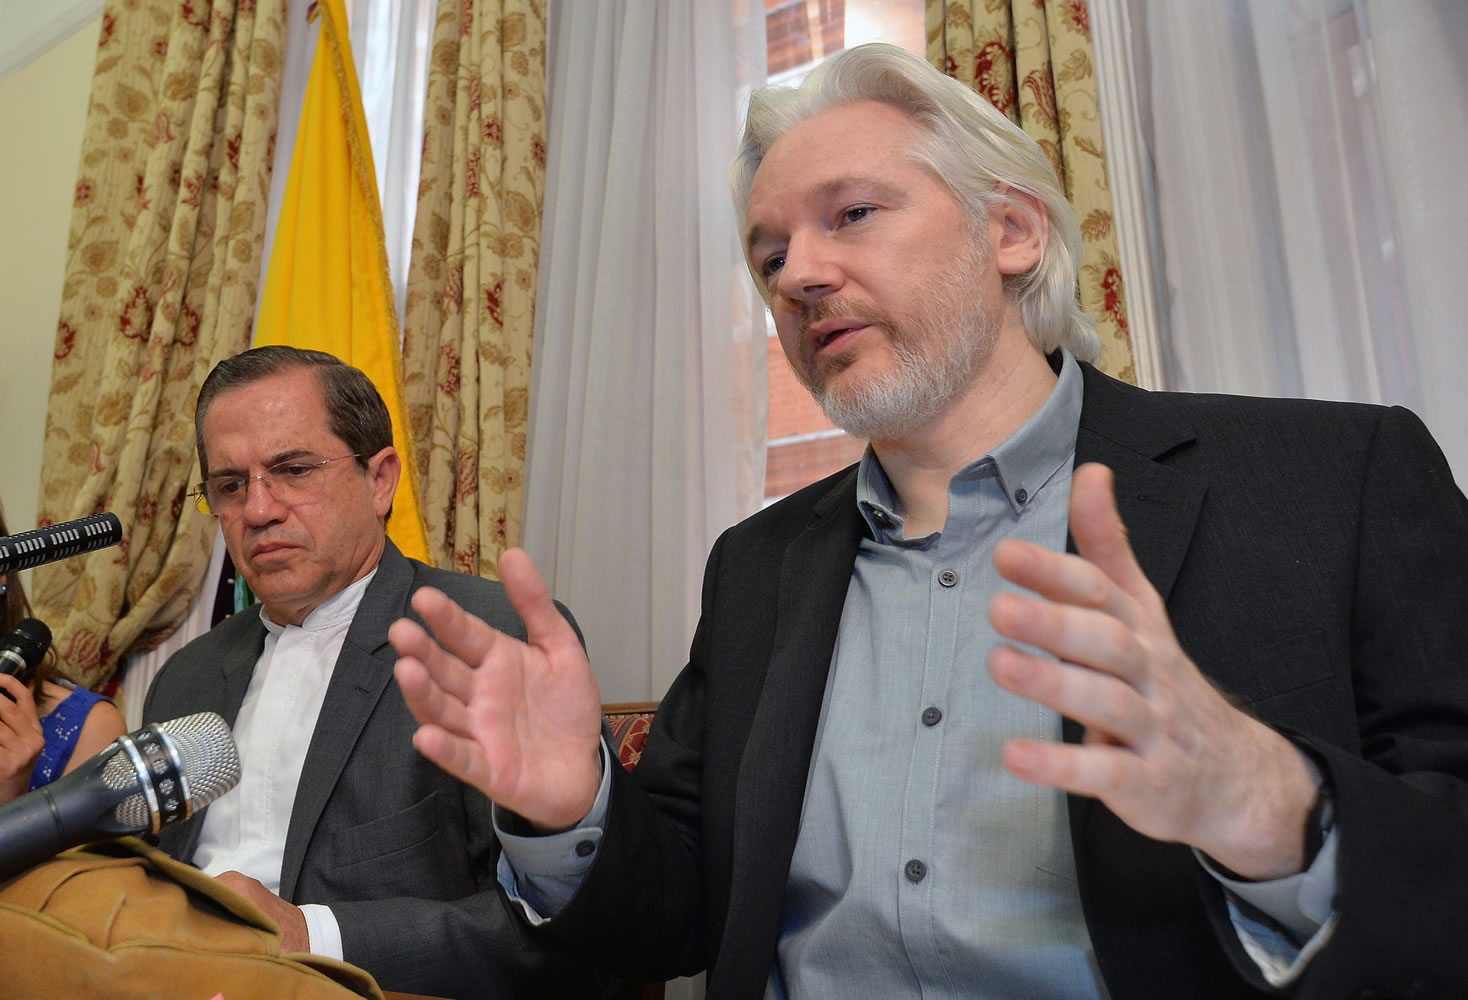 Ecuador's Foreign Minister Ricardo Patino, left, and WikiLeaks founder Julian Assange speak during a press conference inside the Ecuadorian Embassy in London, where he confirmed he &quot;will be leaving the embassy soon&quot;, Monday Aug. 18, 2014.  The Australian Assange fled to the Ecuadorian Embassy in 2012 to escape extradition to Sweden, where he is wanted over allegations of sex crimes.